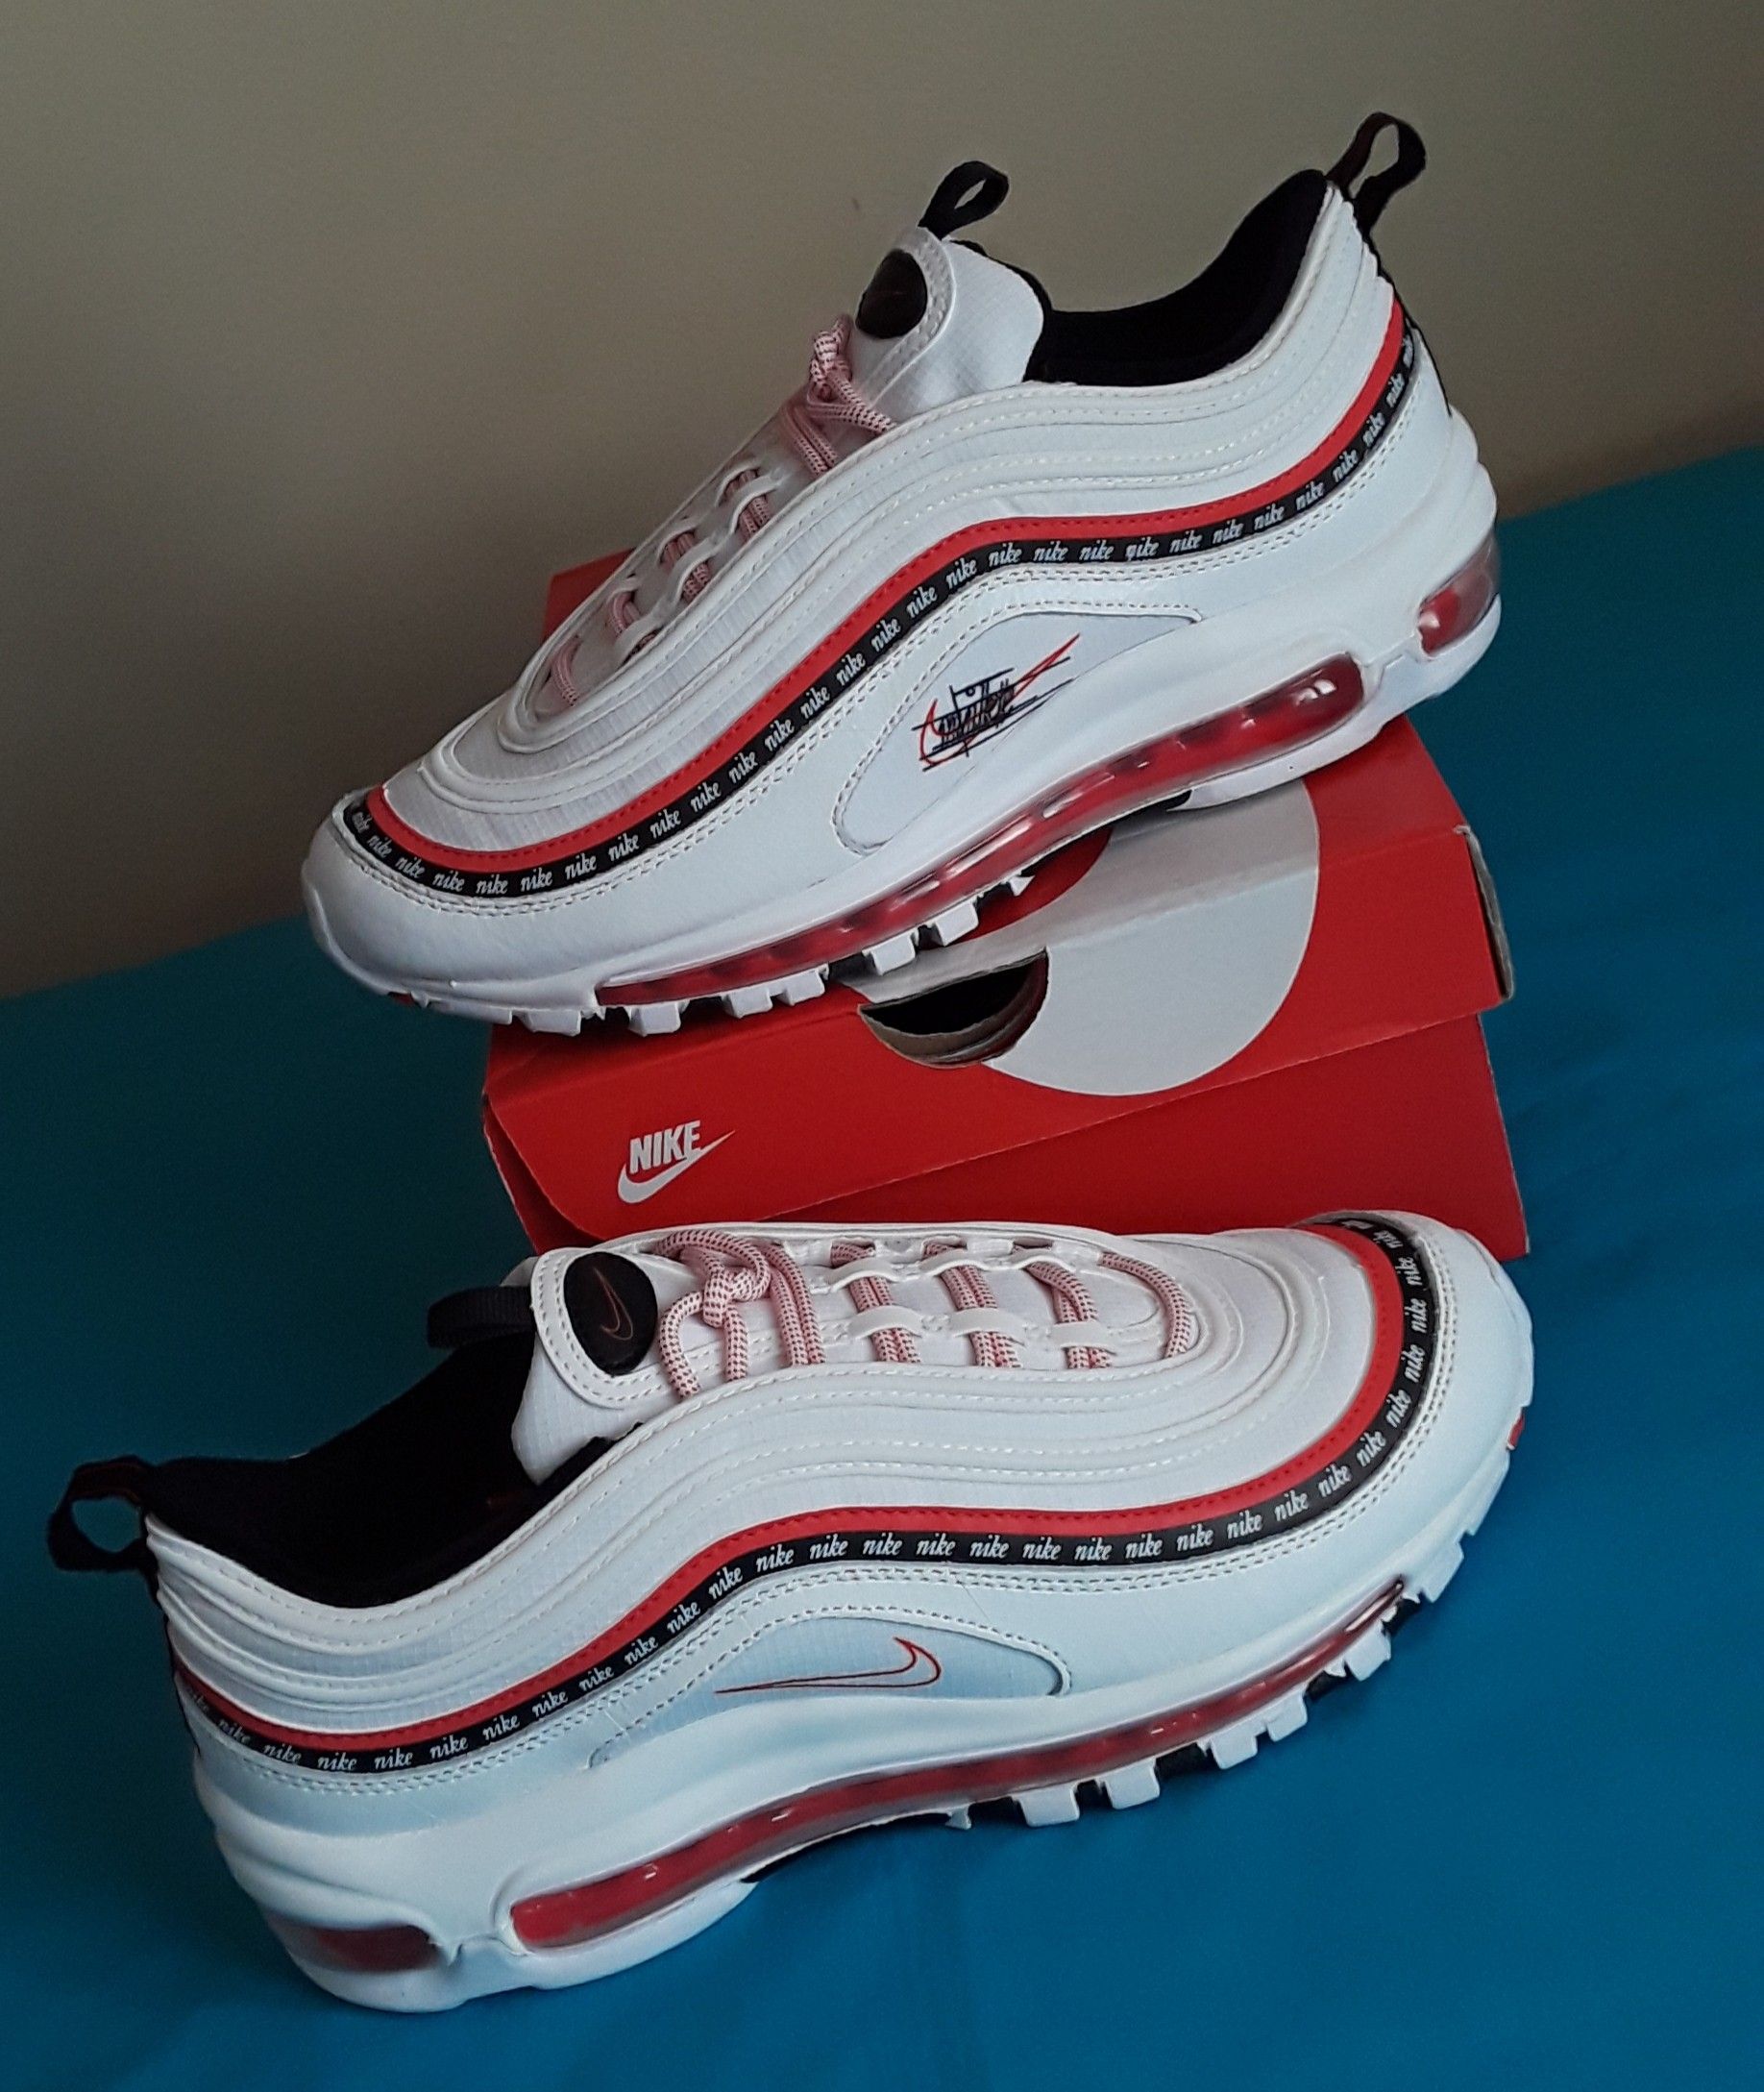 Nike Air Max 97 Script Swoosh White Red Blk SIZE 7 MEN or 8.5 WOMEN or 7Y